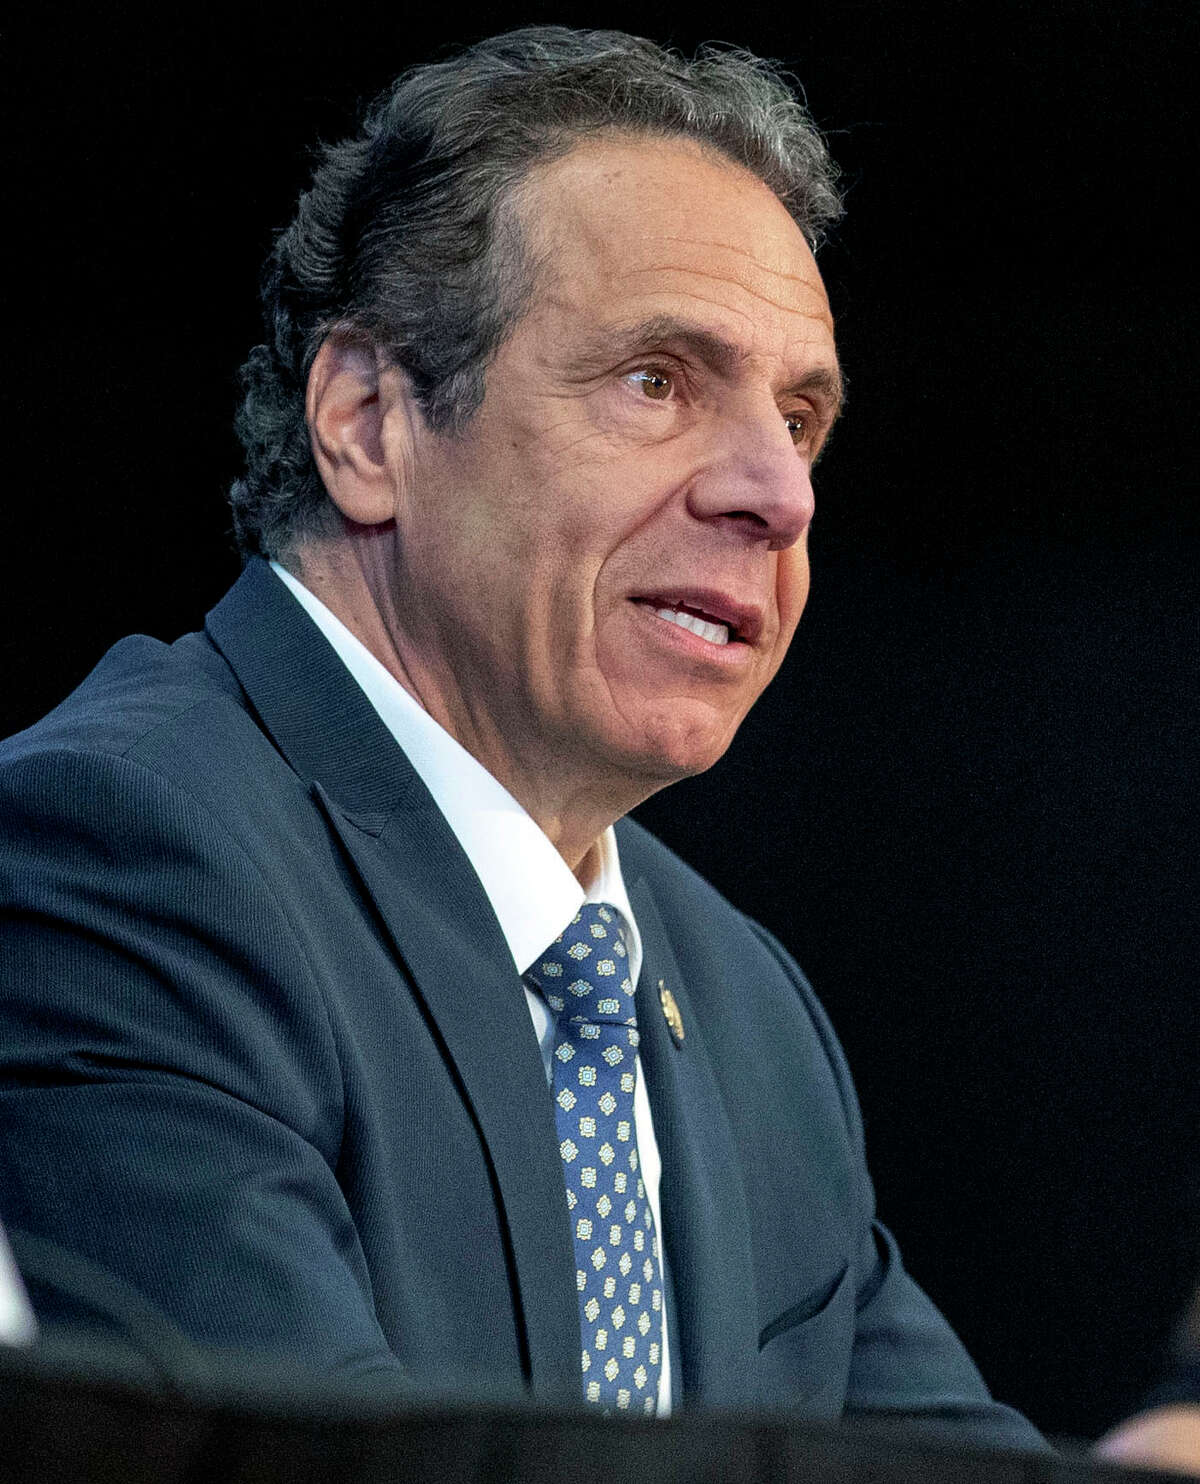 Gov. Andrew Cuomo provides a coronavirus update during a press conference on Monday, May 4, 2020, in Rochester, N.Y. (Office of the Governor)